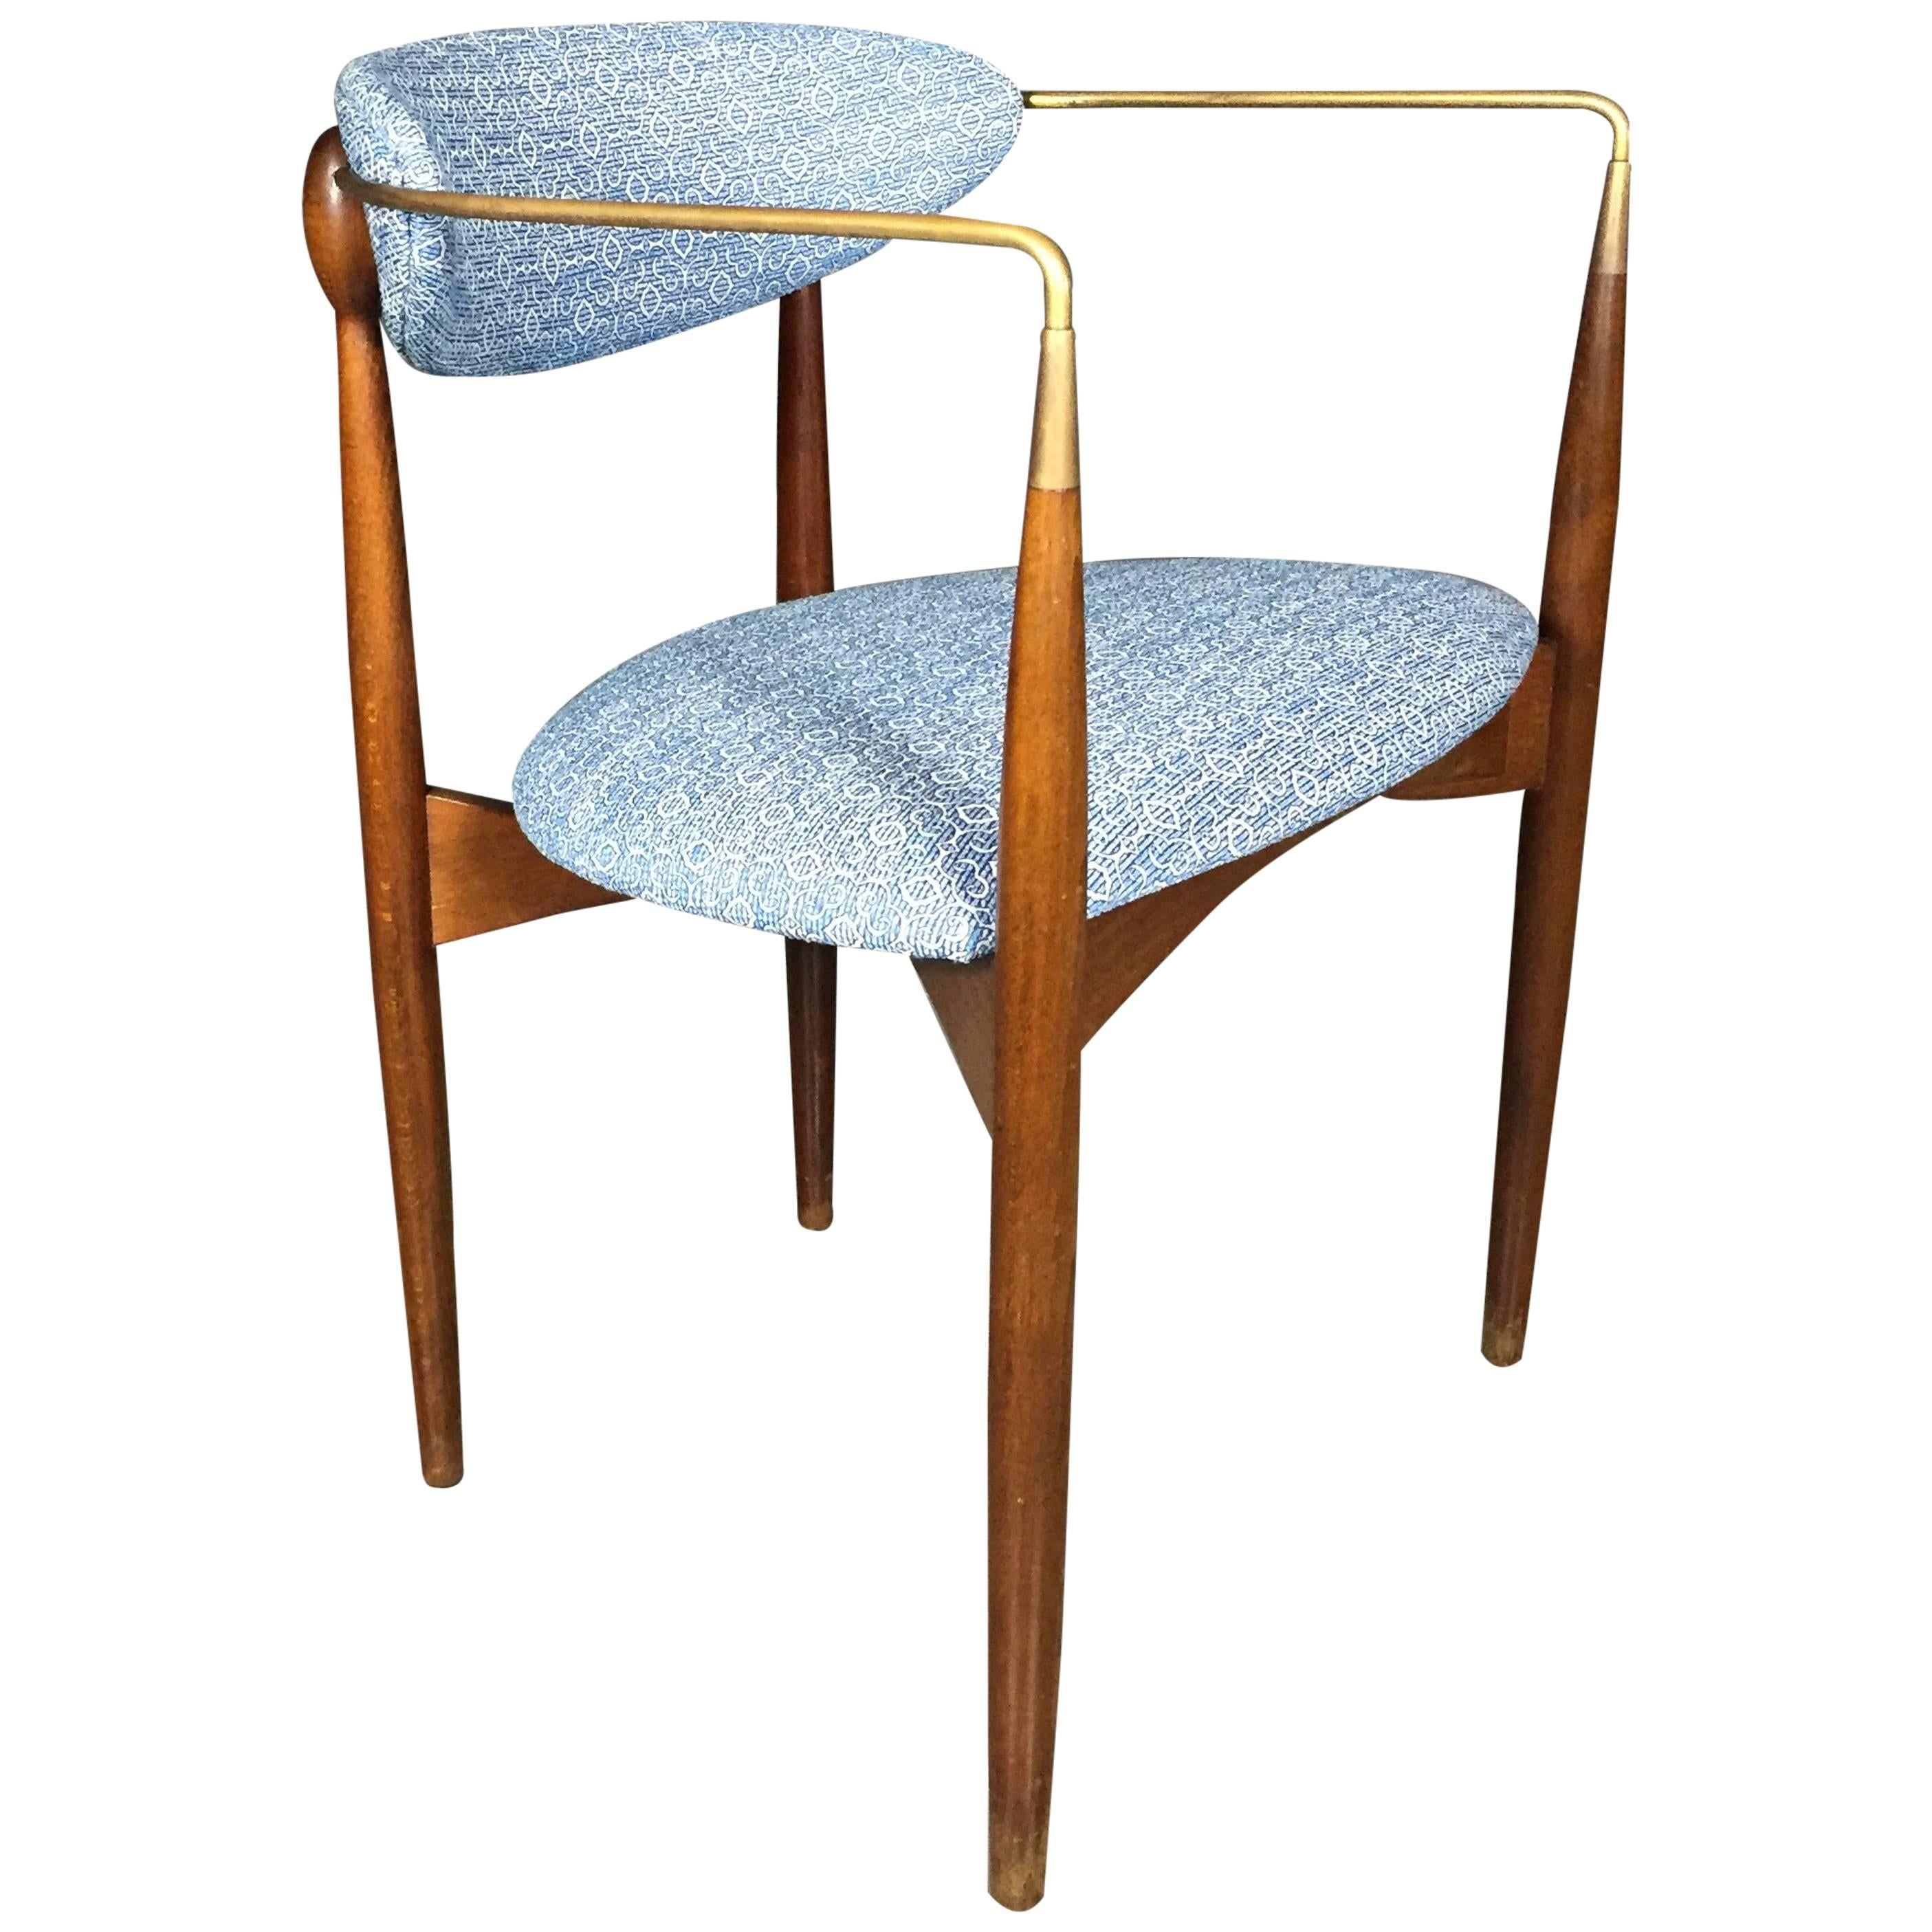 Dan Johnson 'Viscount' Chair for Selig, Walnut and Brass, 1950s